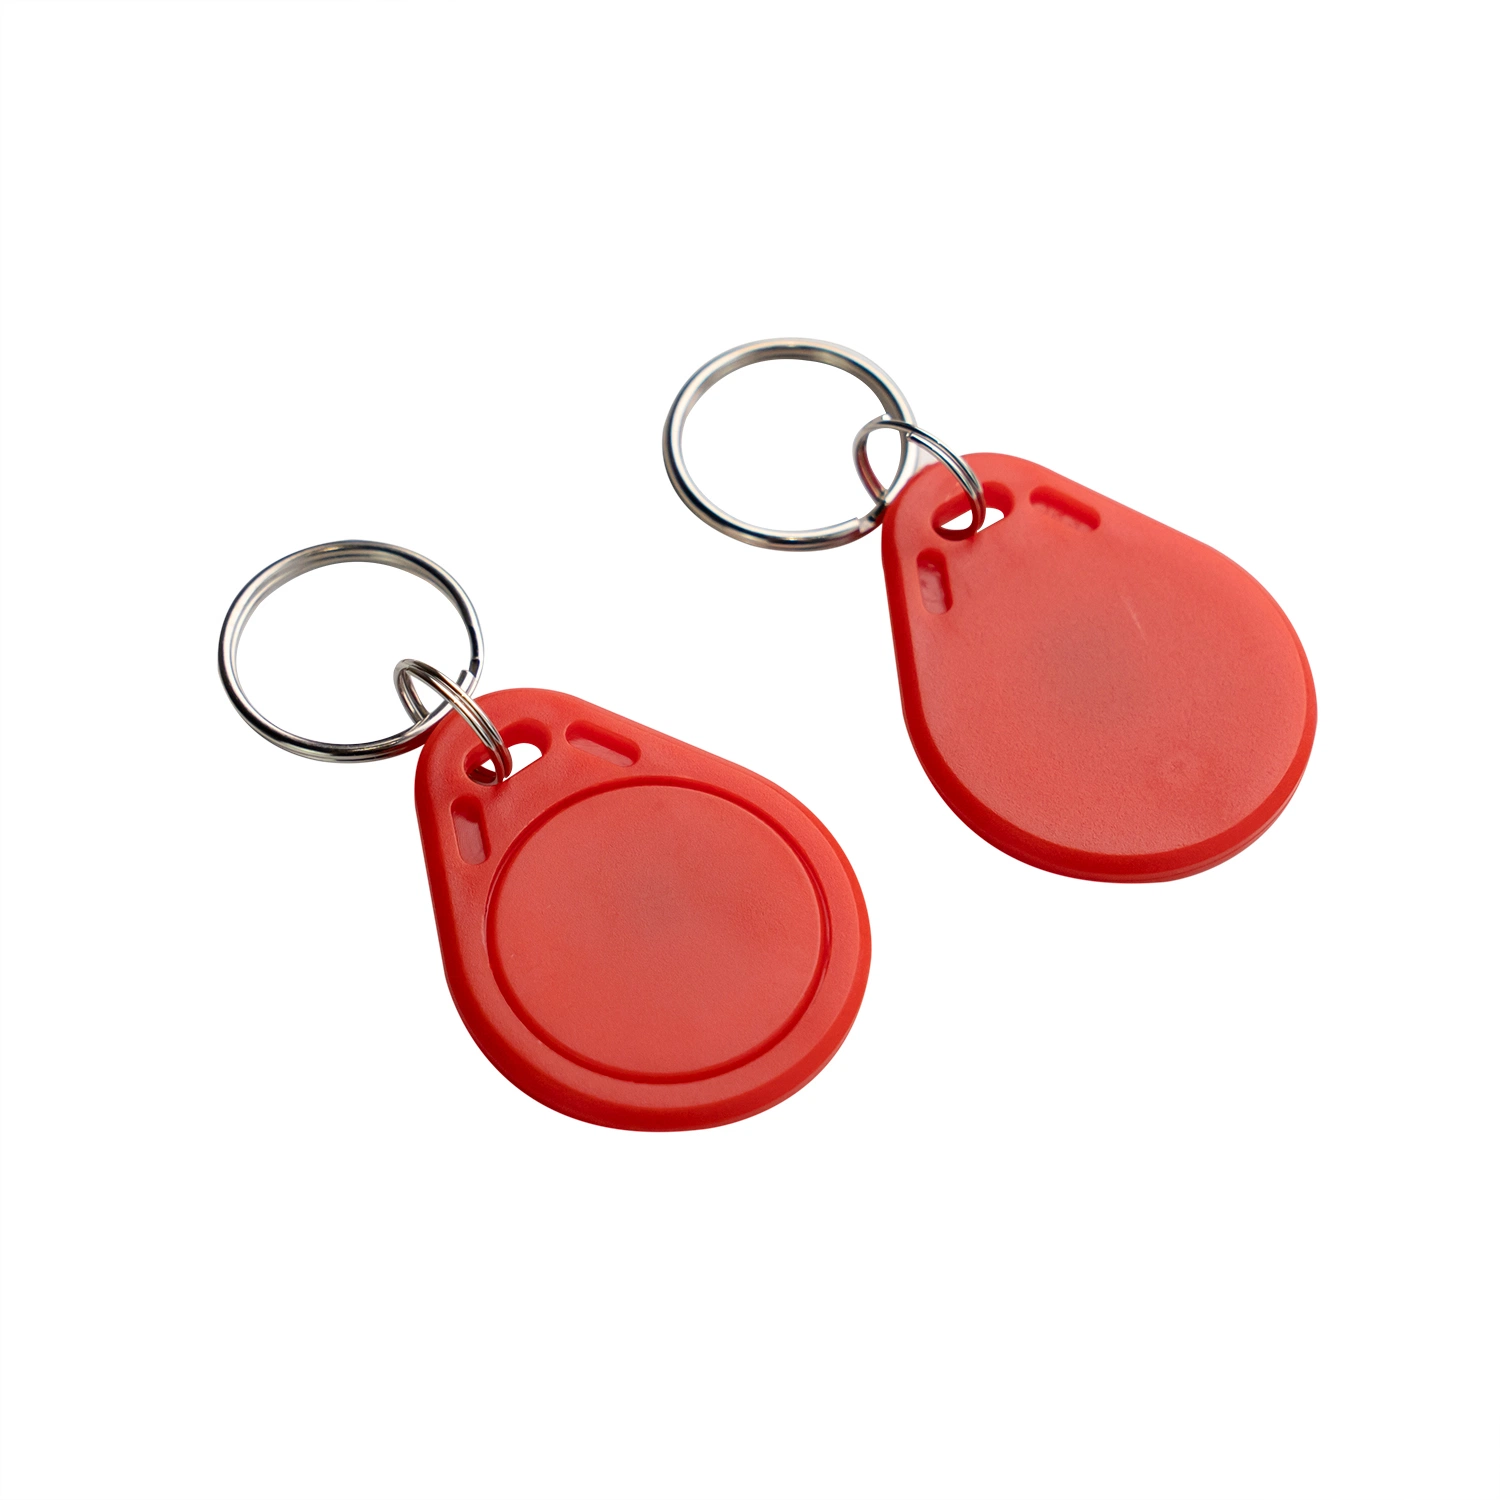 NFC Frequency 13.56 MHz Key Fob Copy Tag NFC Key Fob Red